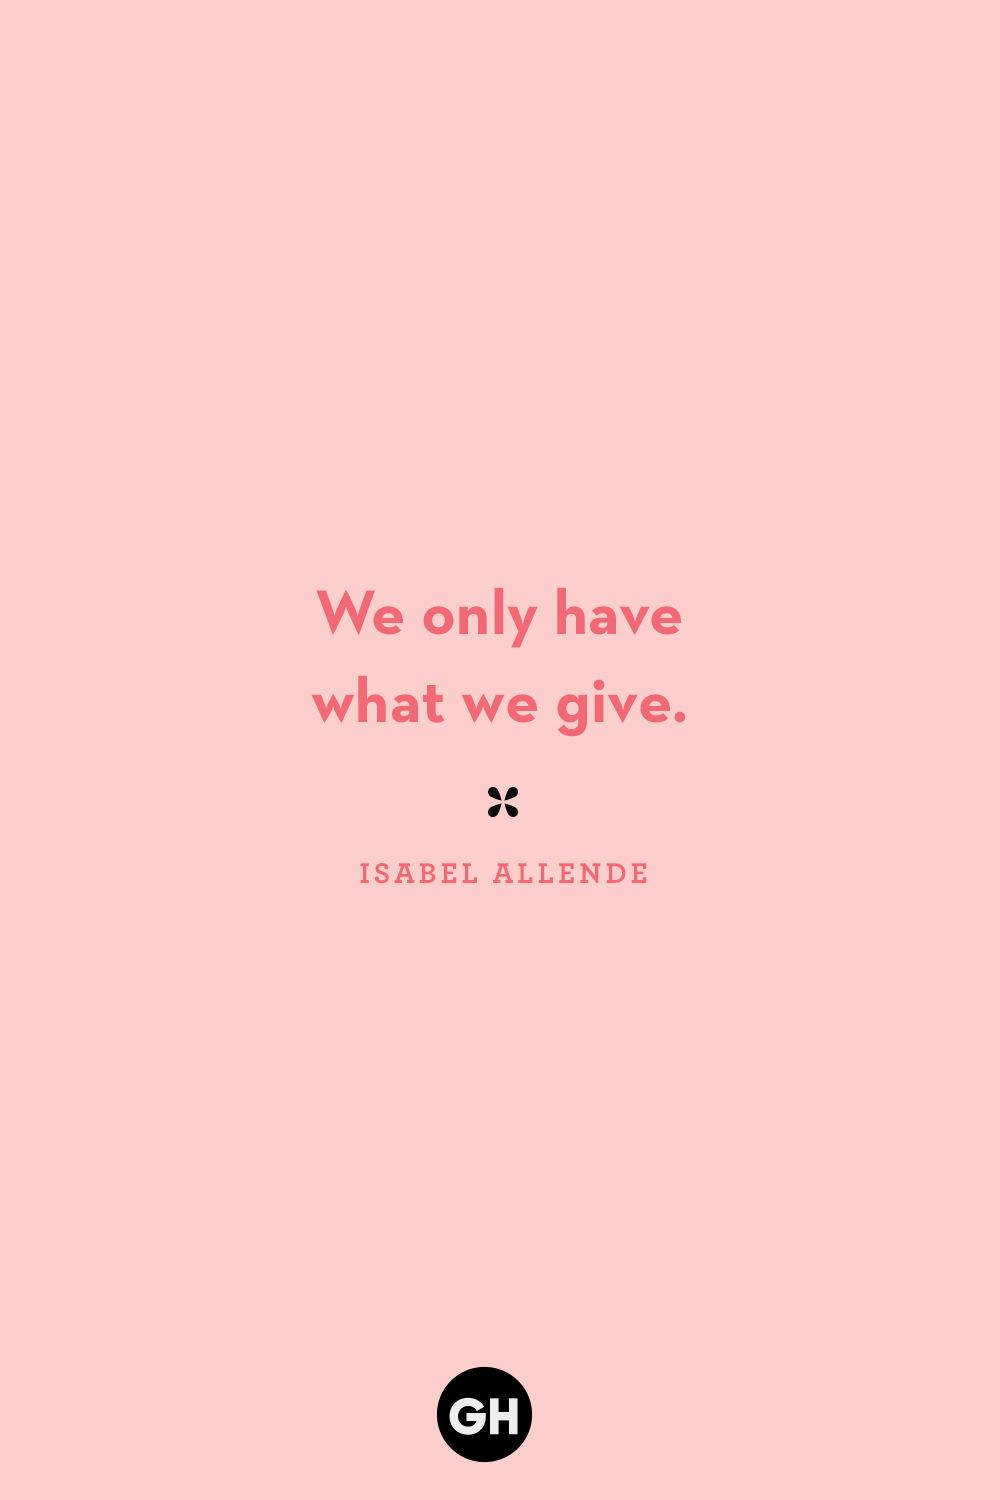 Gift Giving Quotes